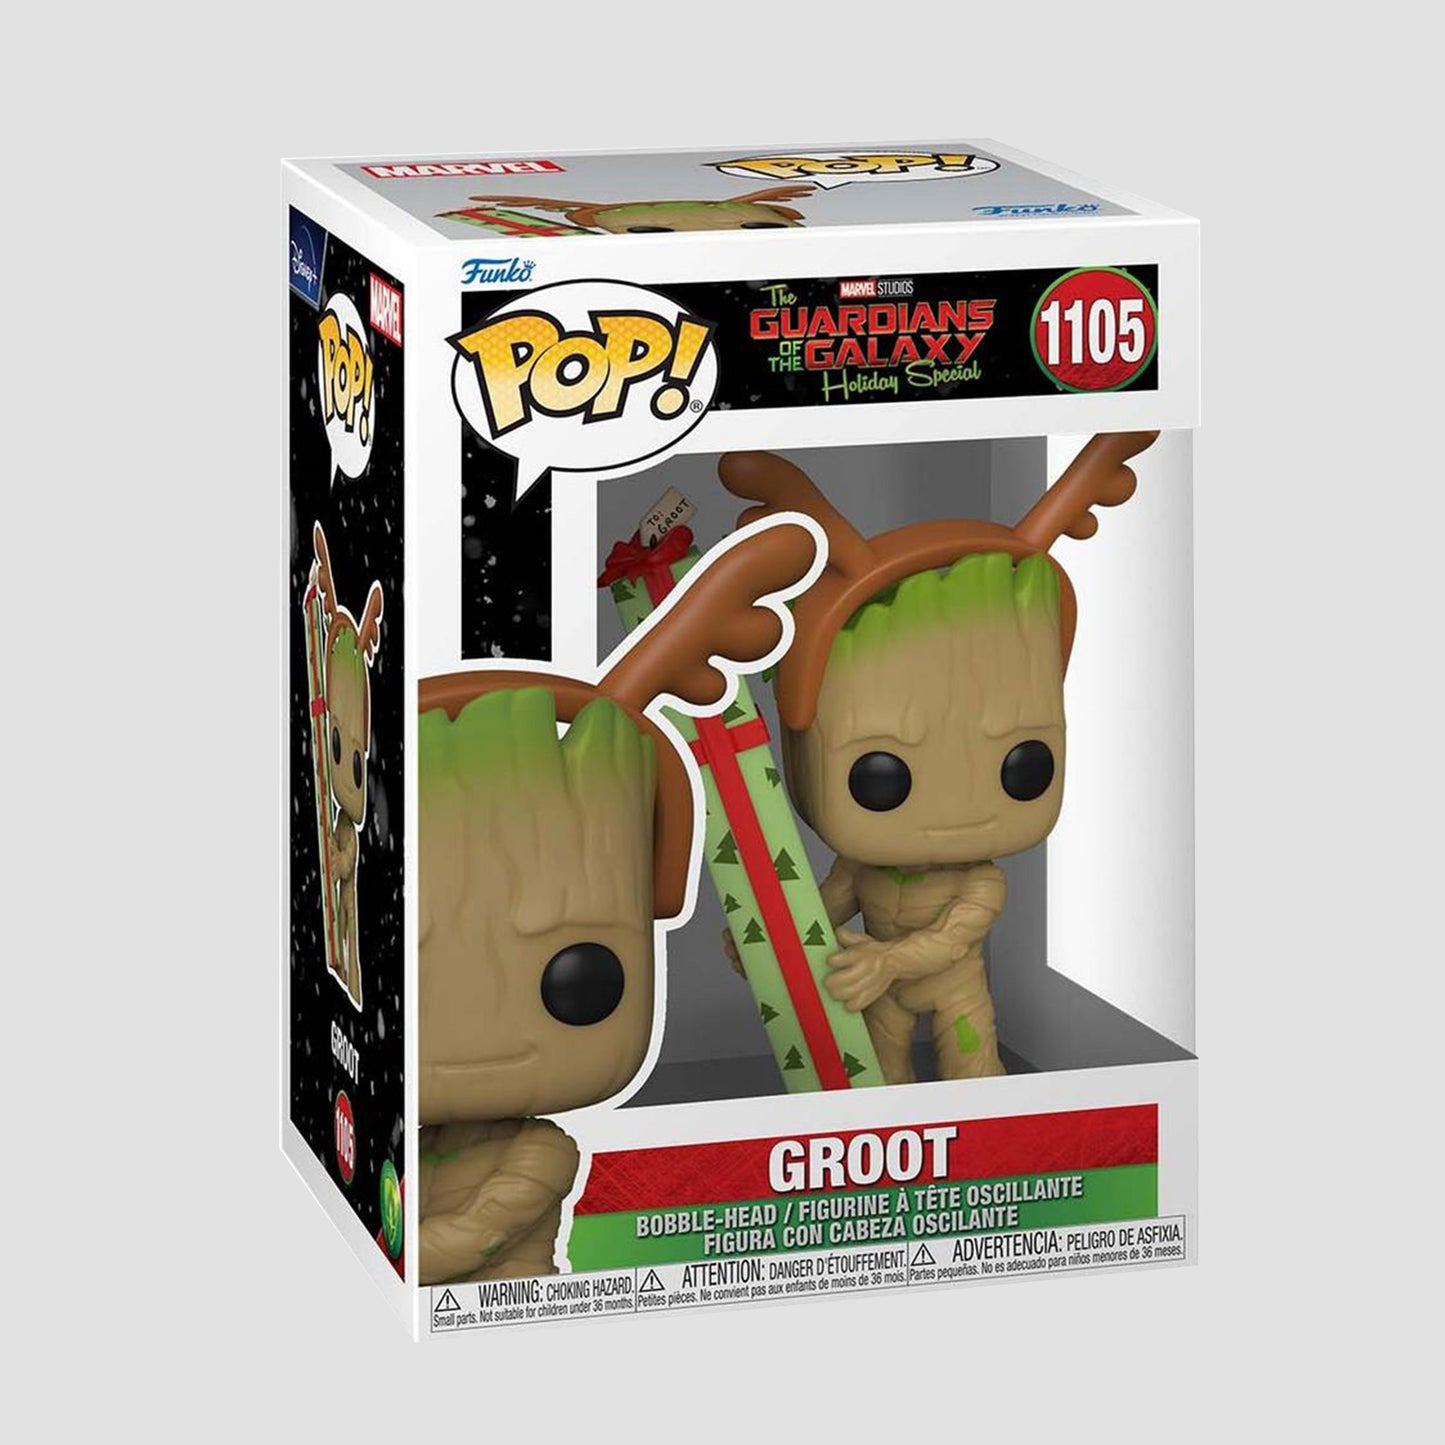 Groot #1105 - Guardians of The Galaxy Holiday Special Funko Pop!